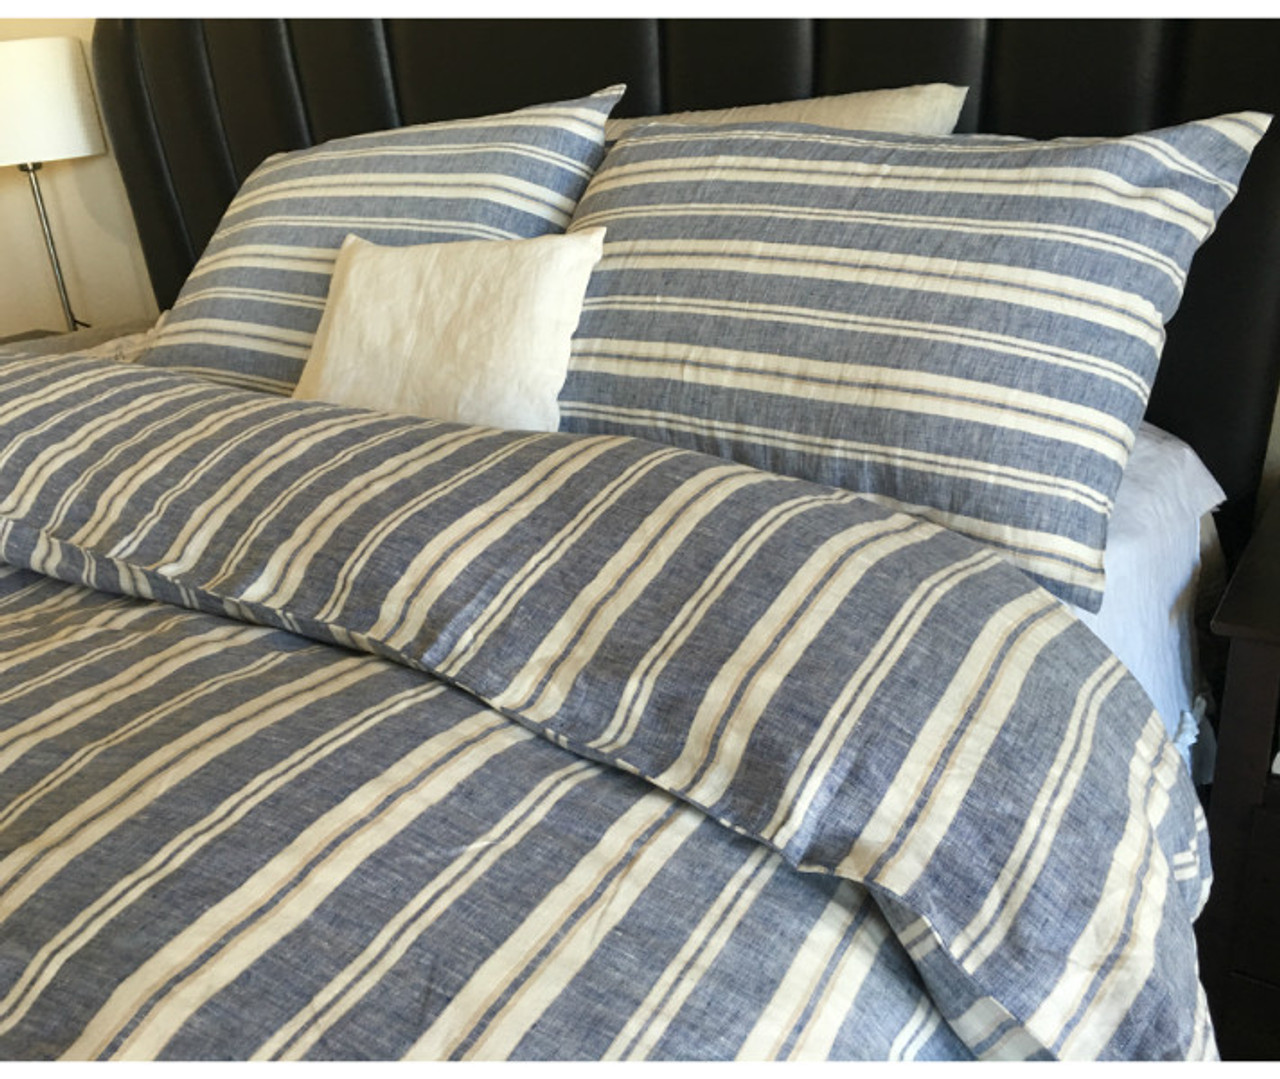 Nautical Striped Duvet Cover Natural Linen Navy And White Stripe